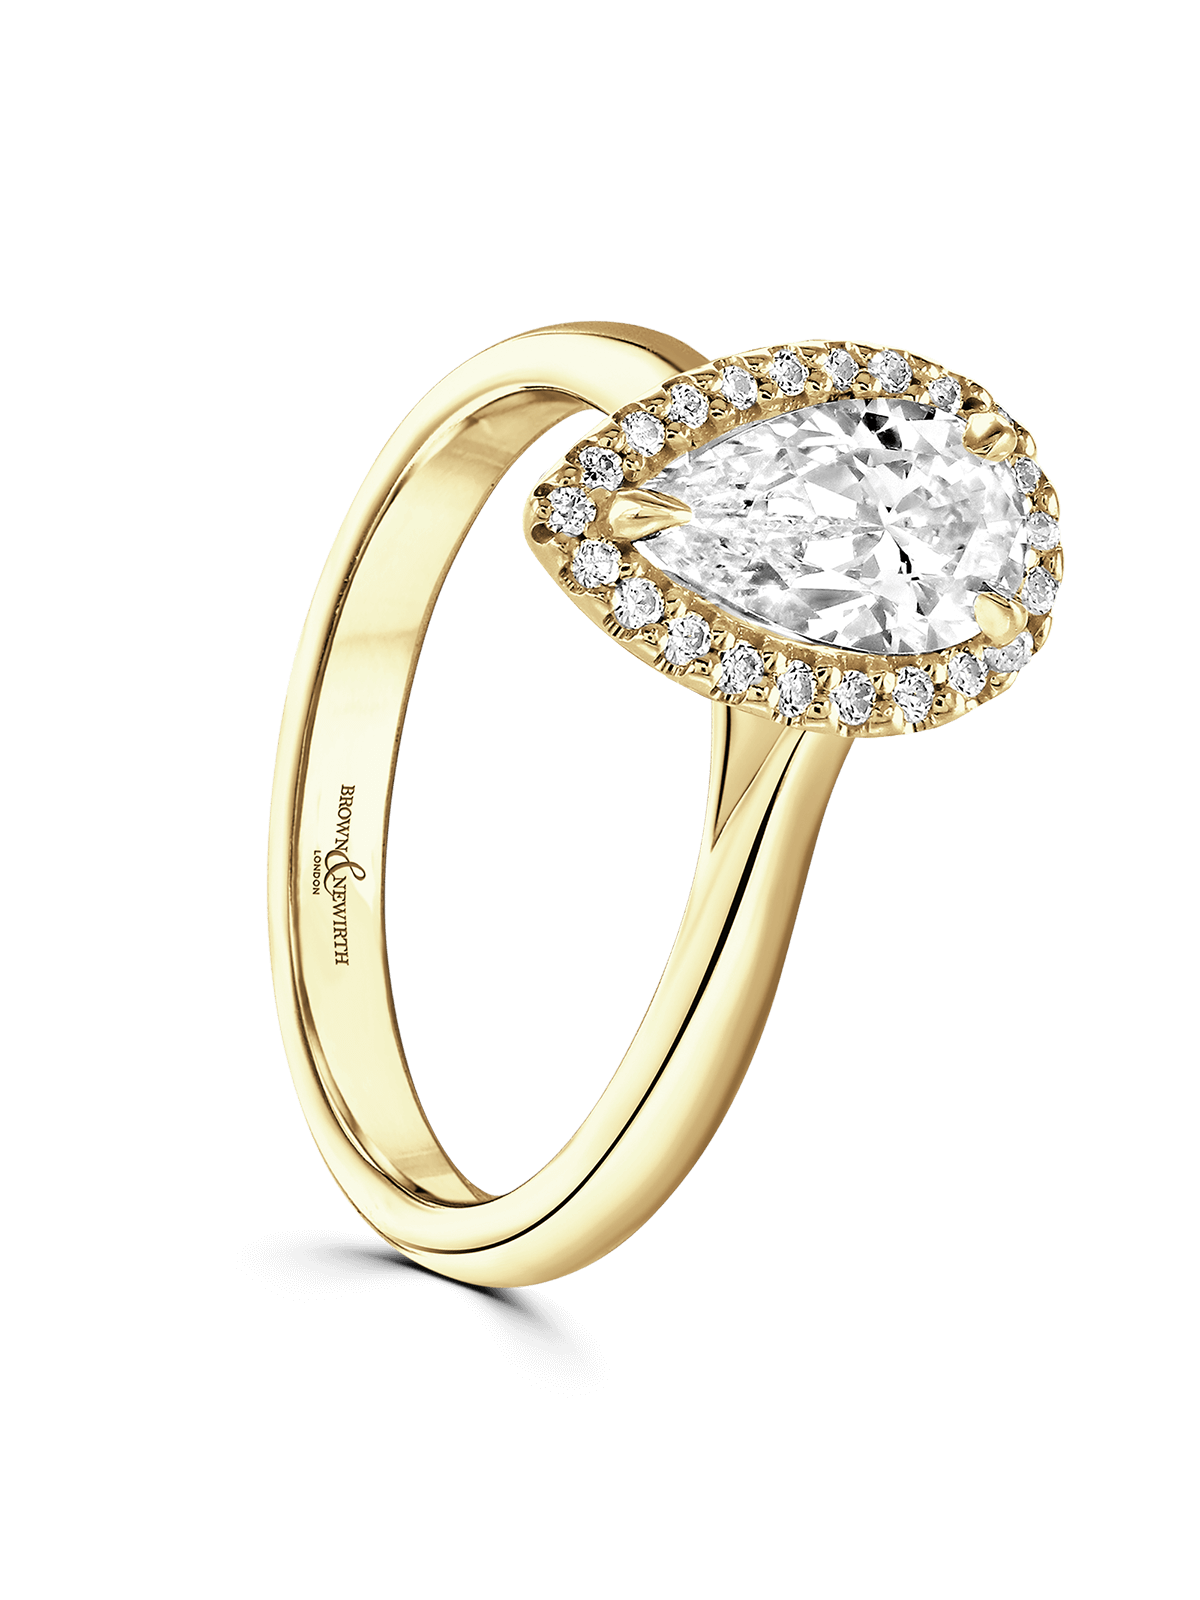 Brown & Newirth Cordelia 0.70ct Pear Cut Certificated Diamond Halo Engagement Ring in 18ct Yellow Gold